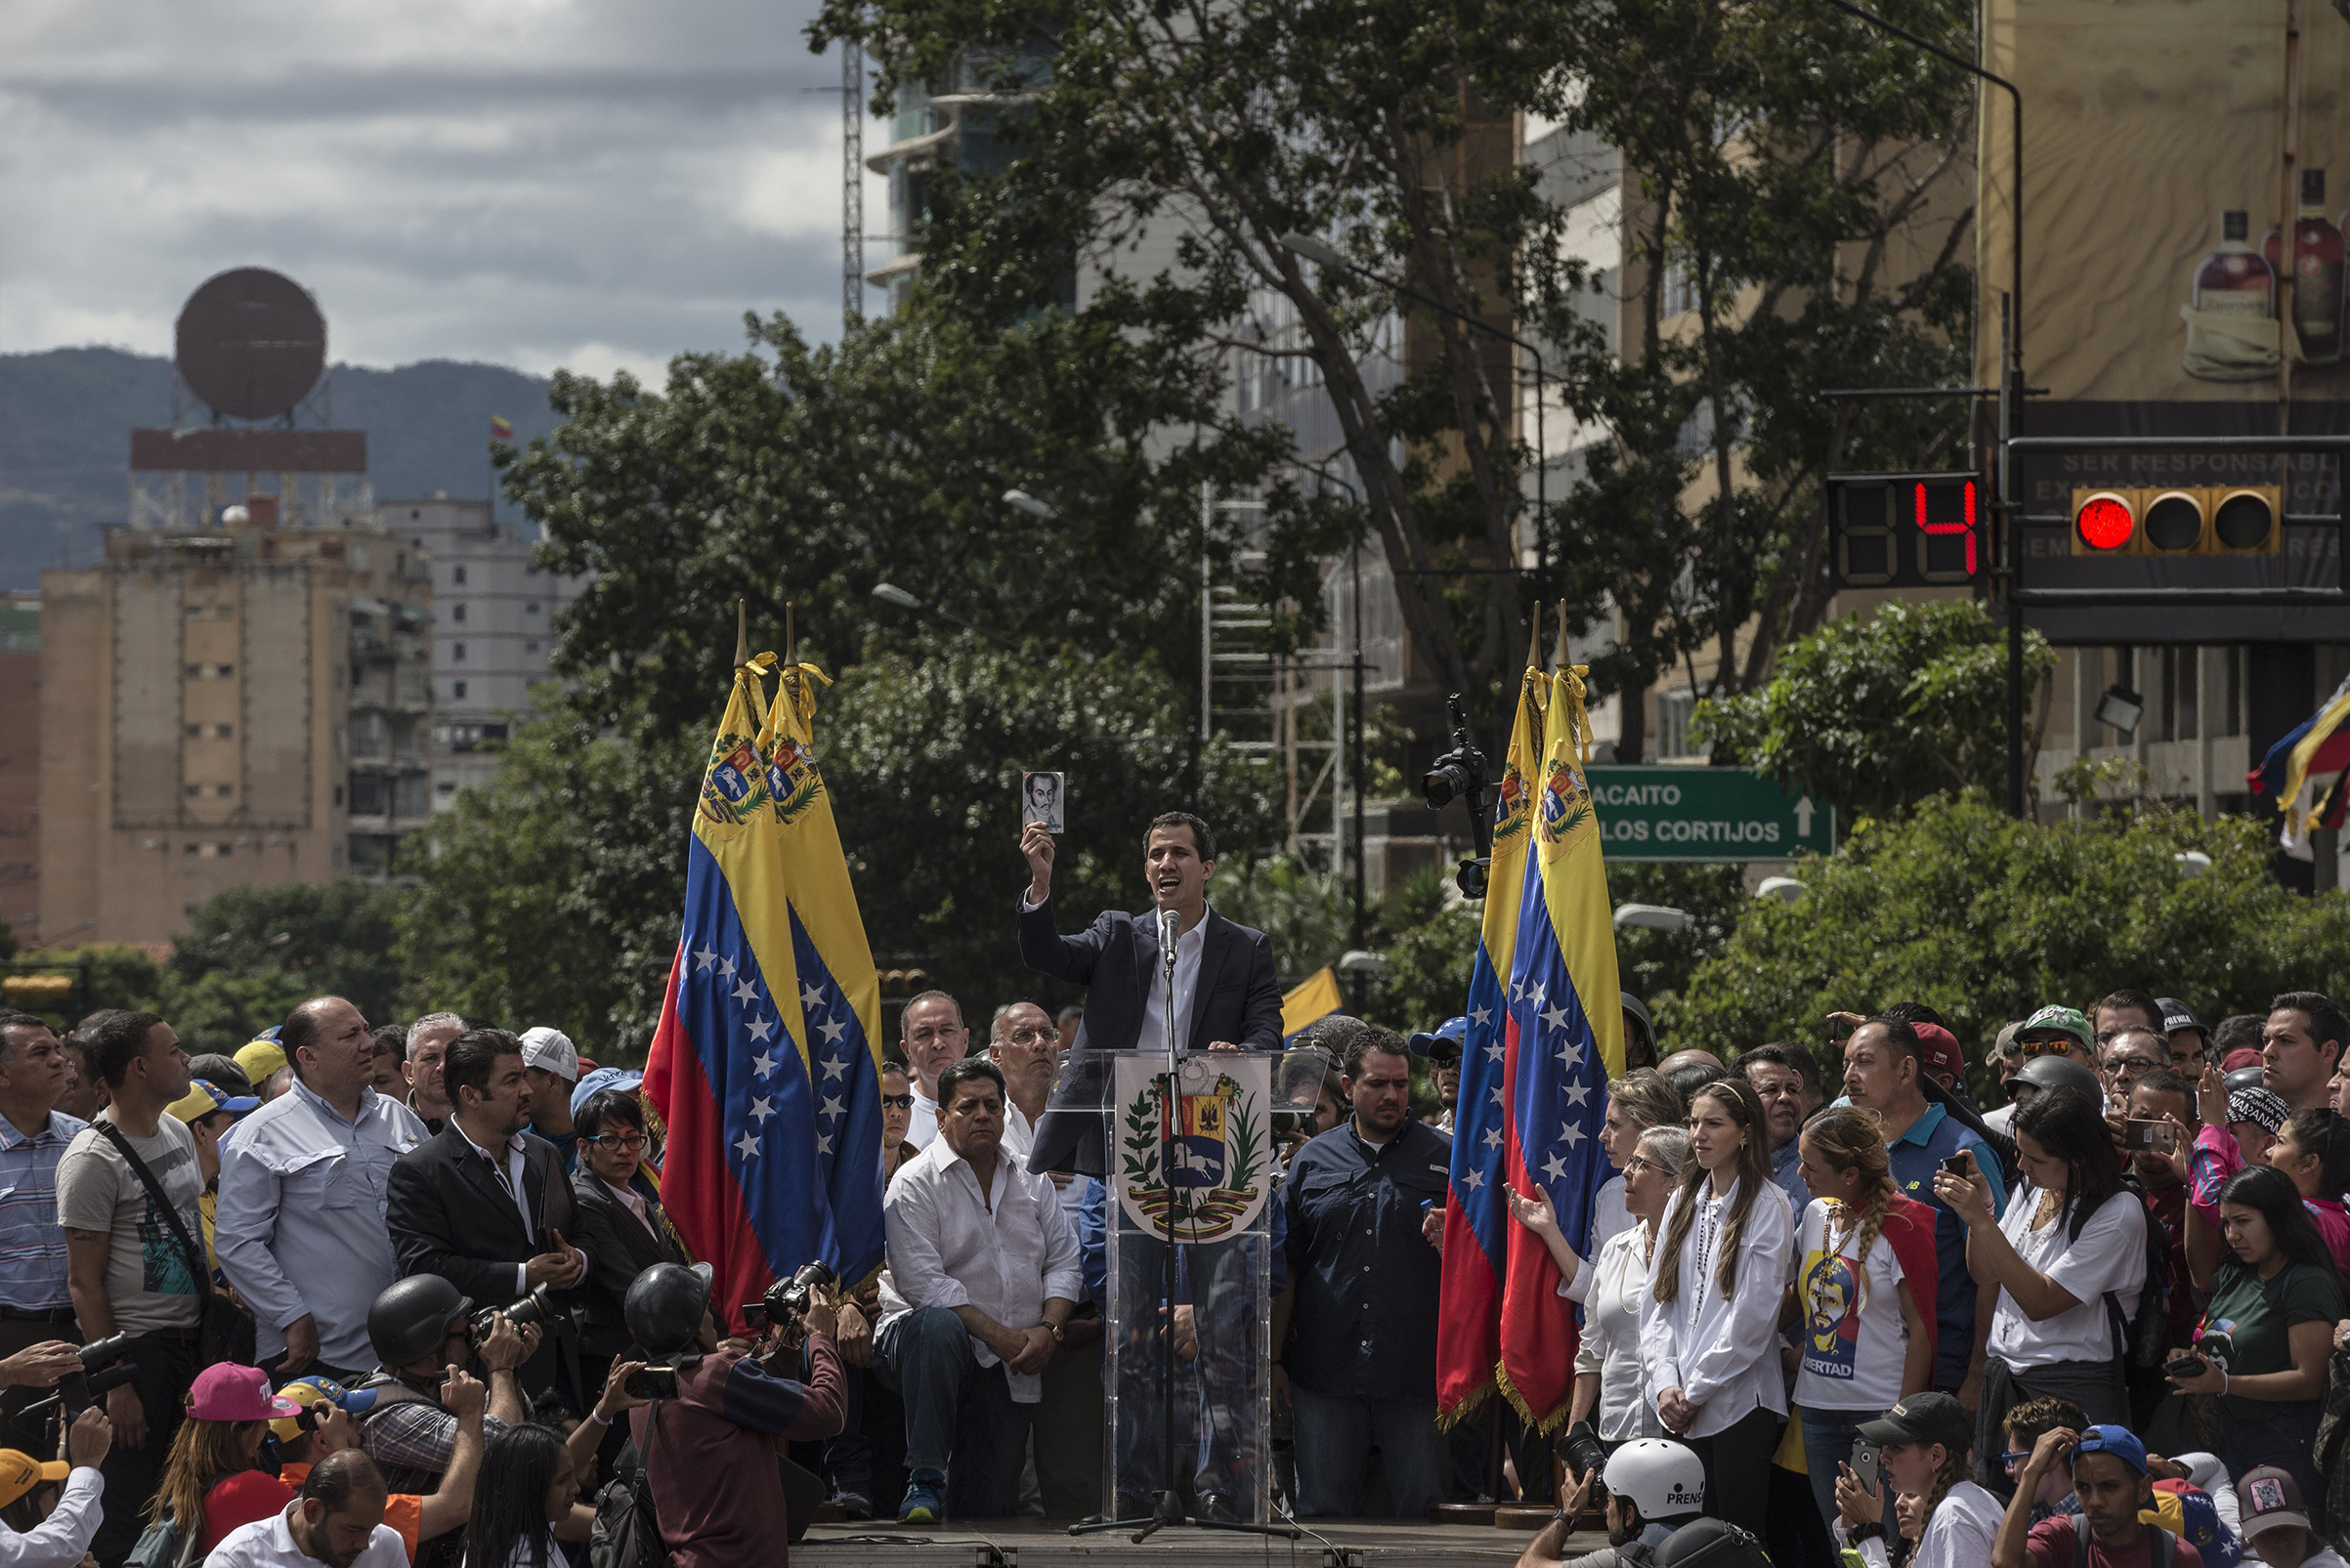 Juan Guaido, leader of the opposition-controlled congress, shows the National Constitution as he declares himself interim president in front of hundreds of Venezuelans during a mass rally against Nicolás Maduro in Caracas on Jan. 23, 2019. (Marcelo Perez Del Carpio—Anadolu Agency/Getty Images)